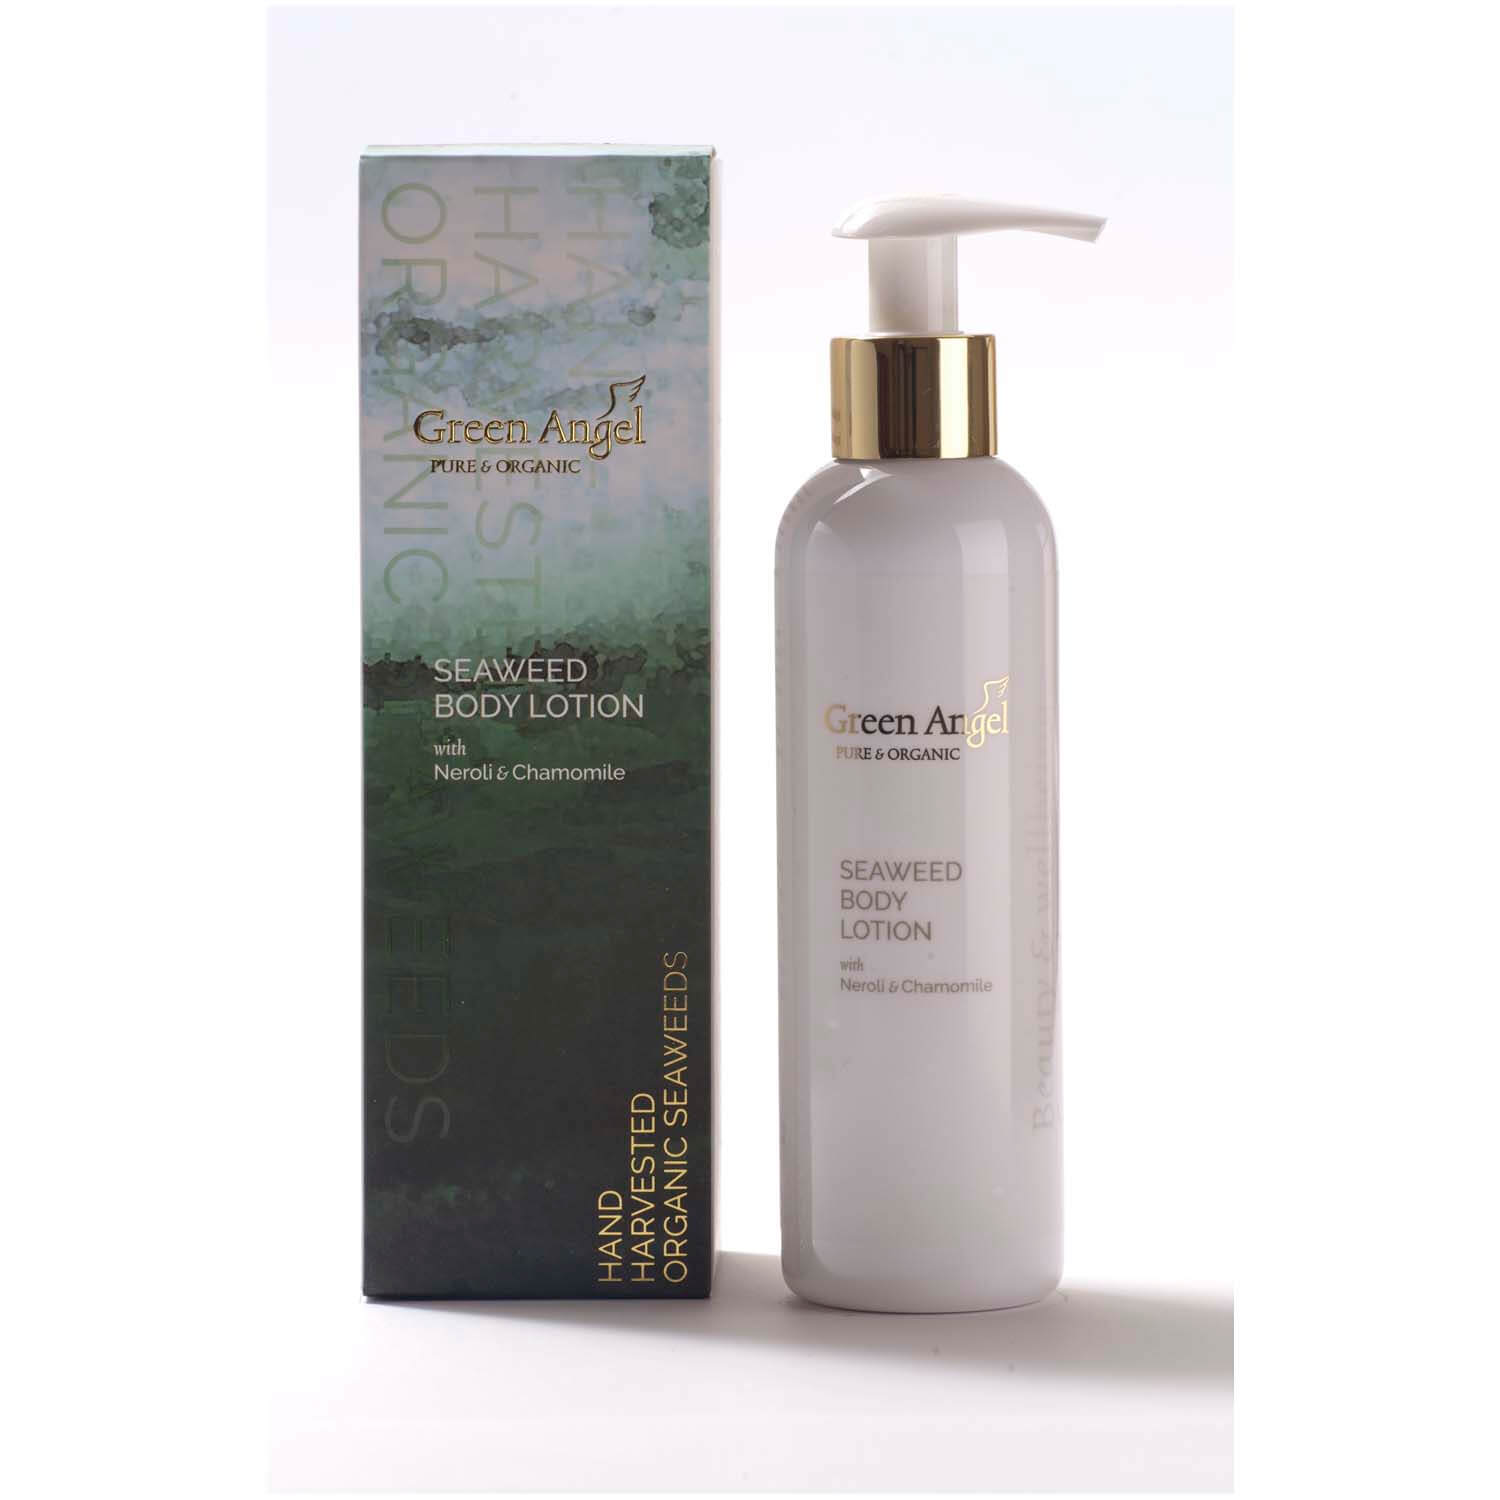 Green Angel Green Angel Seaweed Body Lotion with Neroli and Chamomile - 200ml 1 Shaws Department Stores